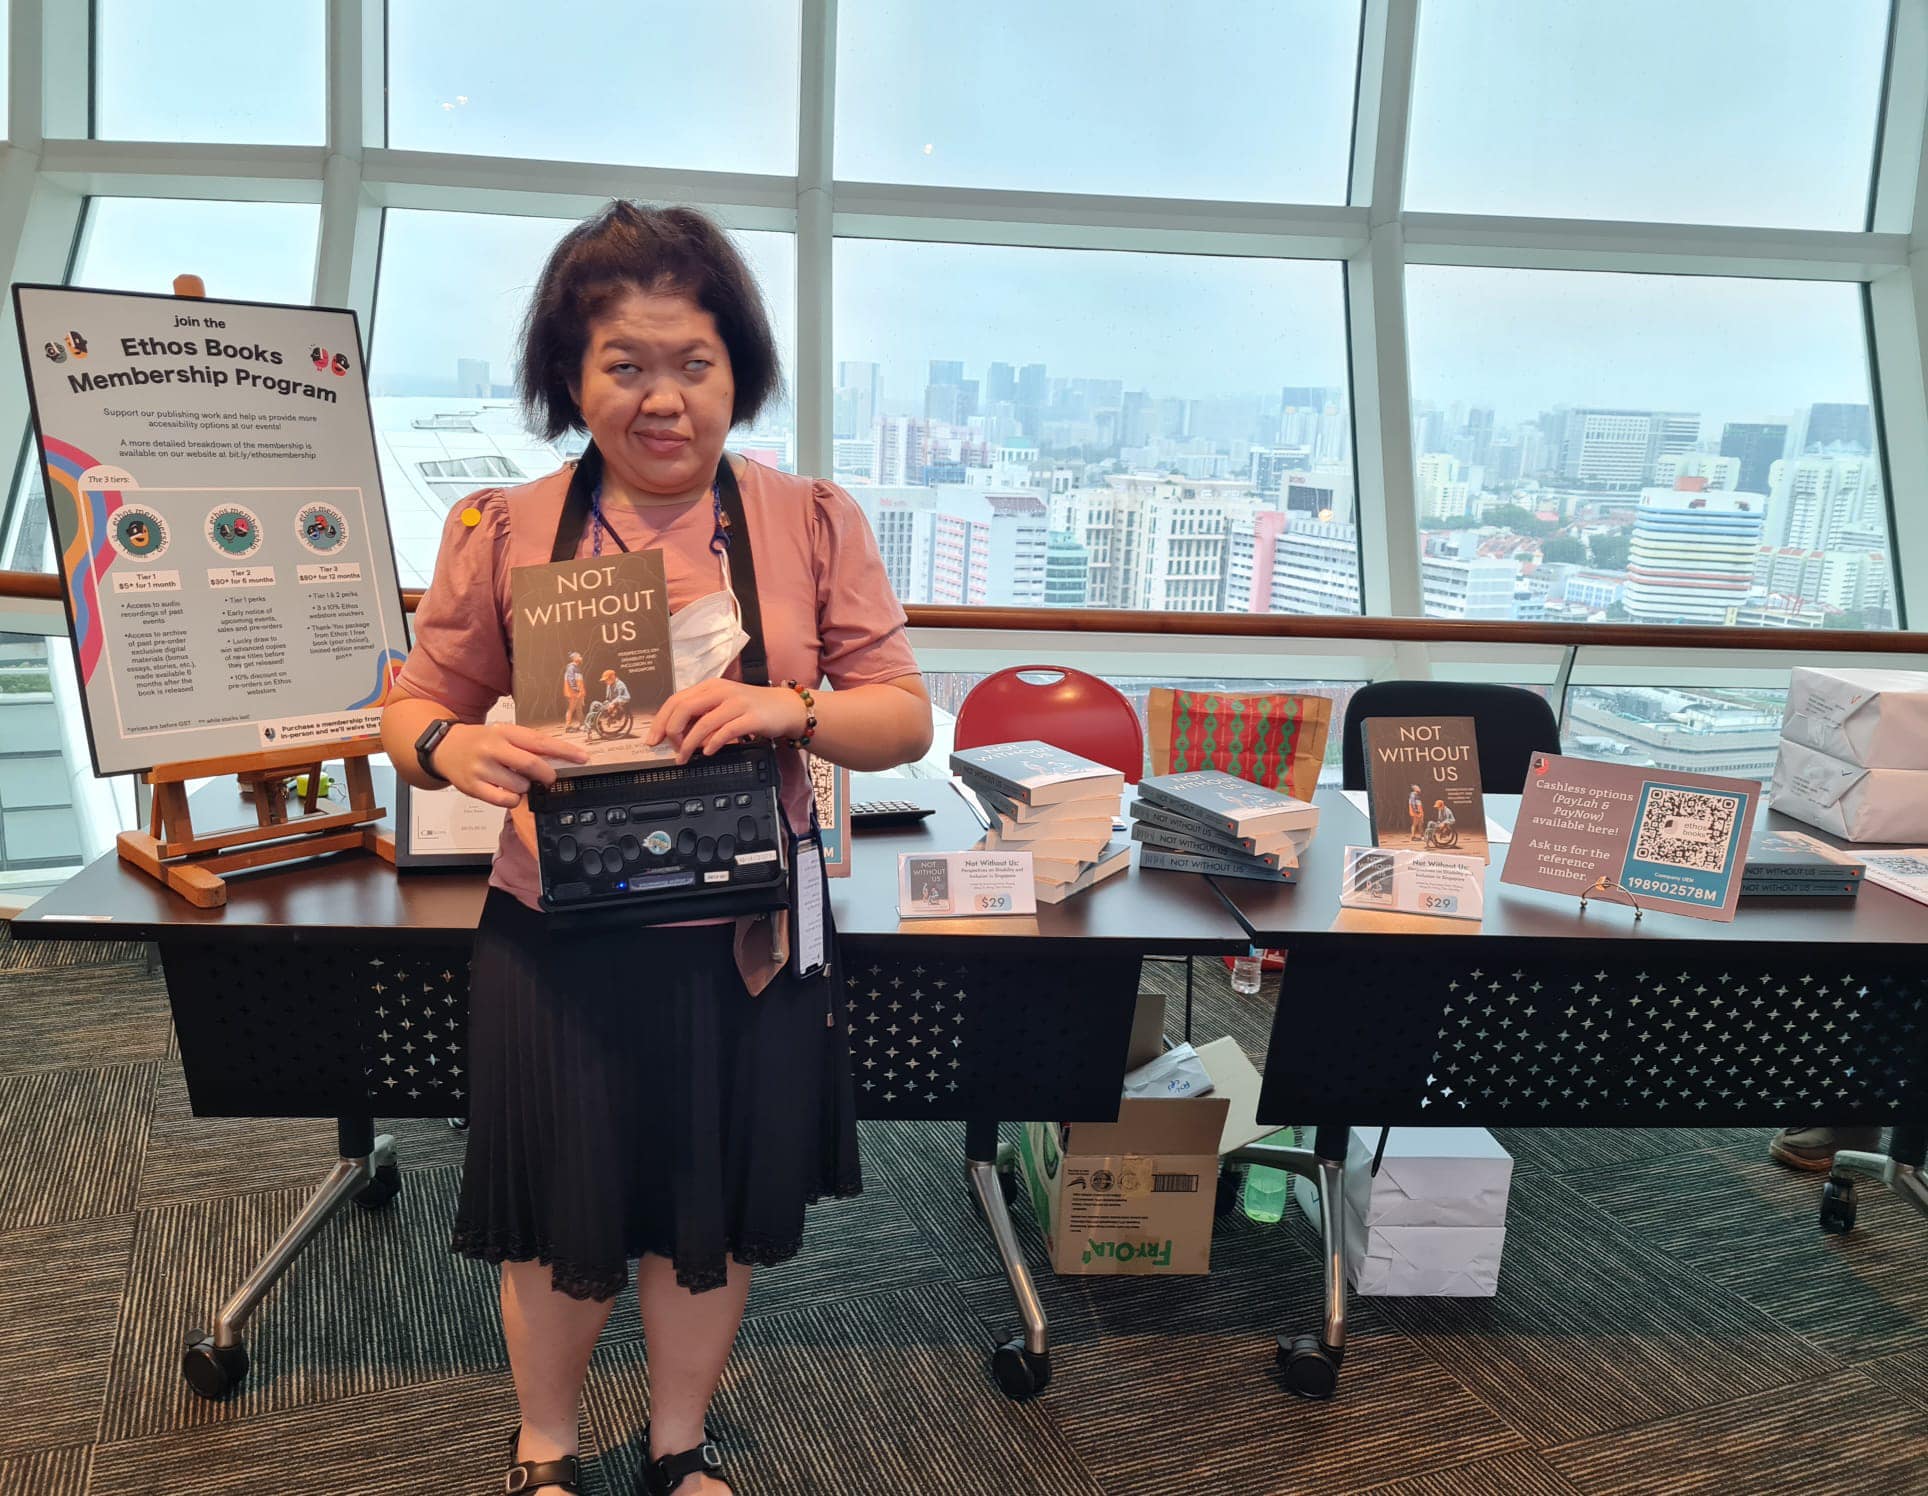 Siew Ling posing with a copy of Not Without Us during the book launch event.